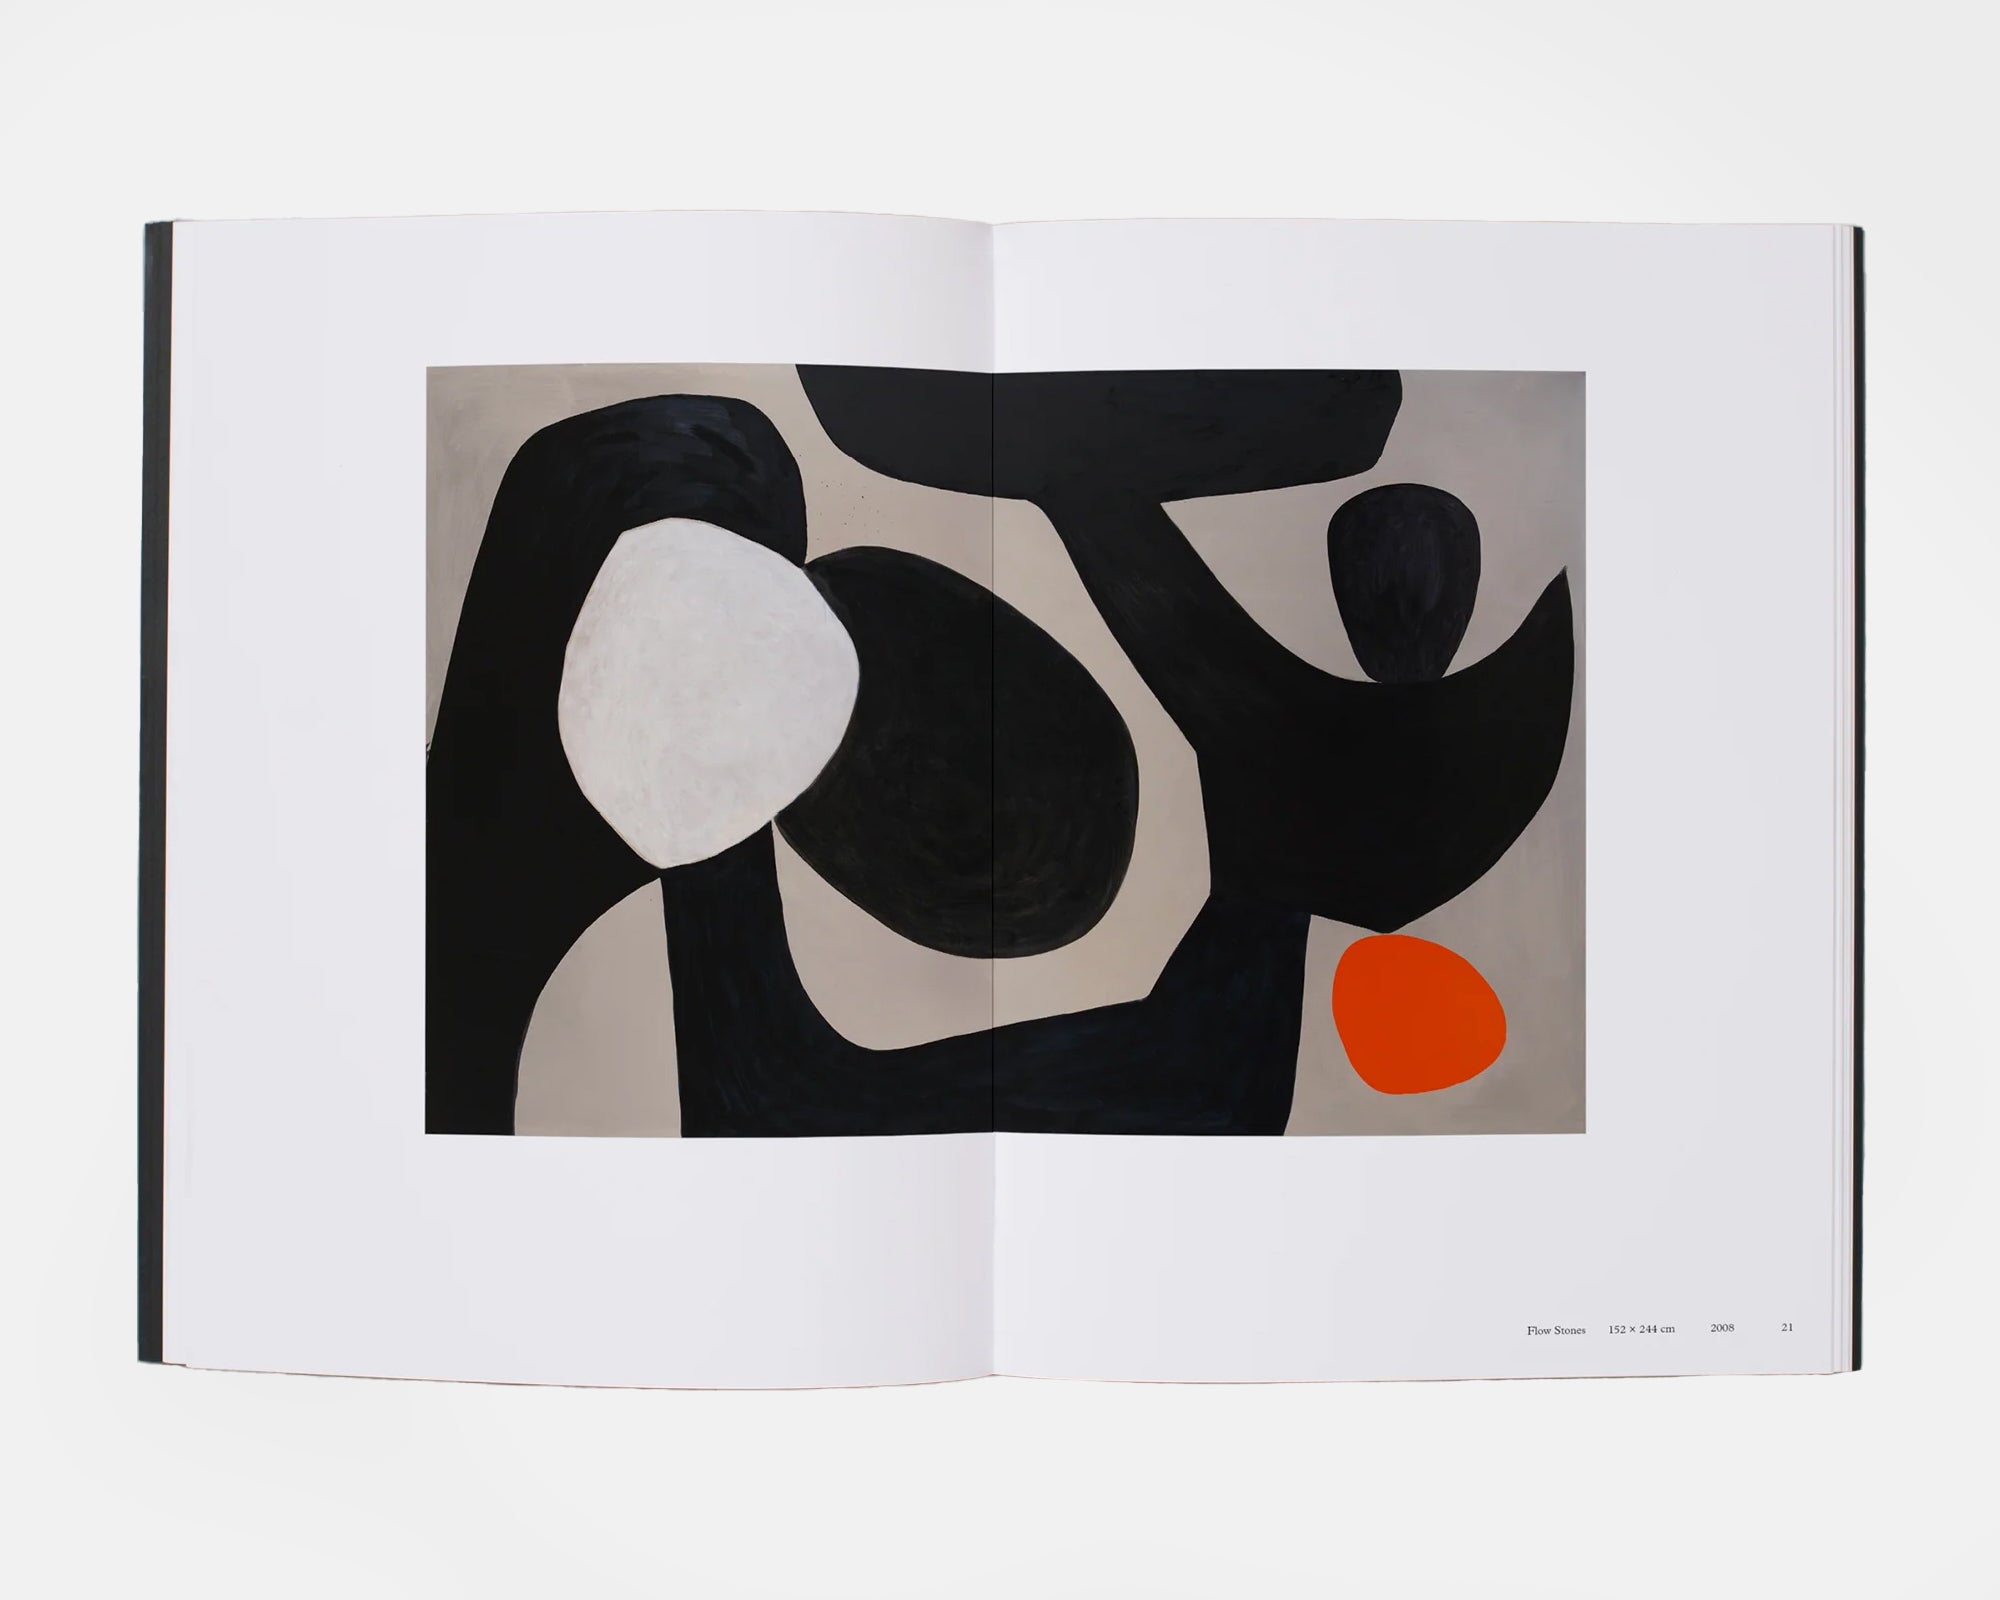 Only Dancing, Stephen Ormandy